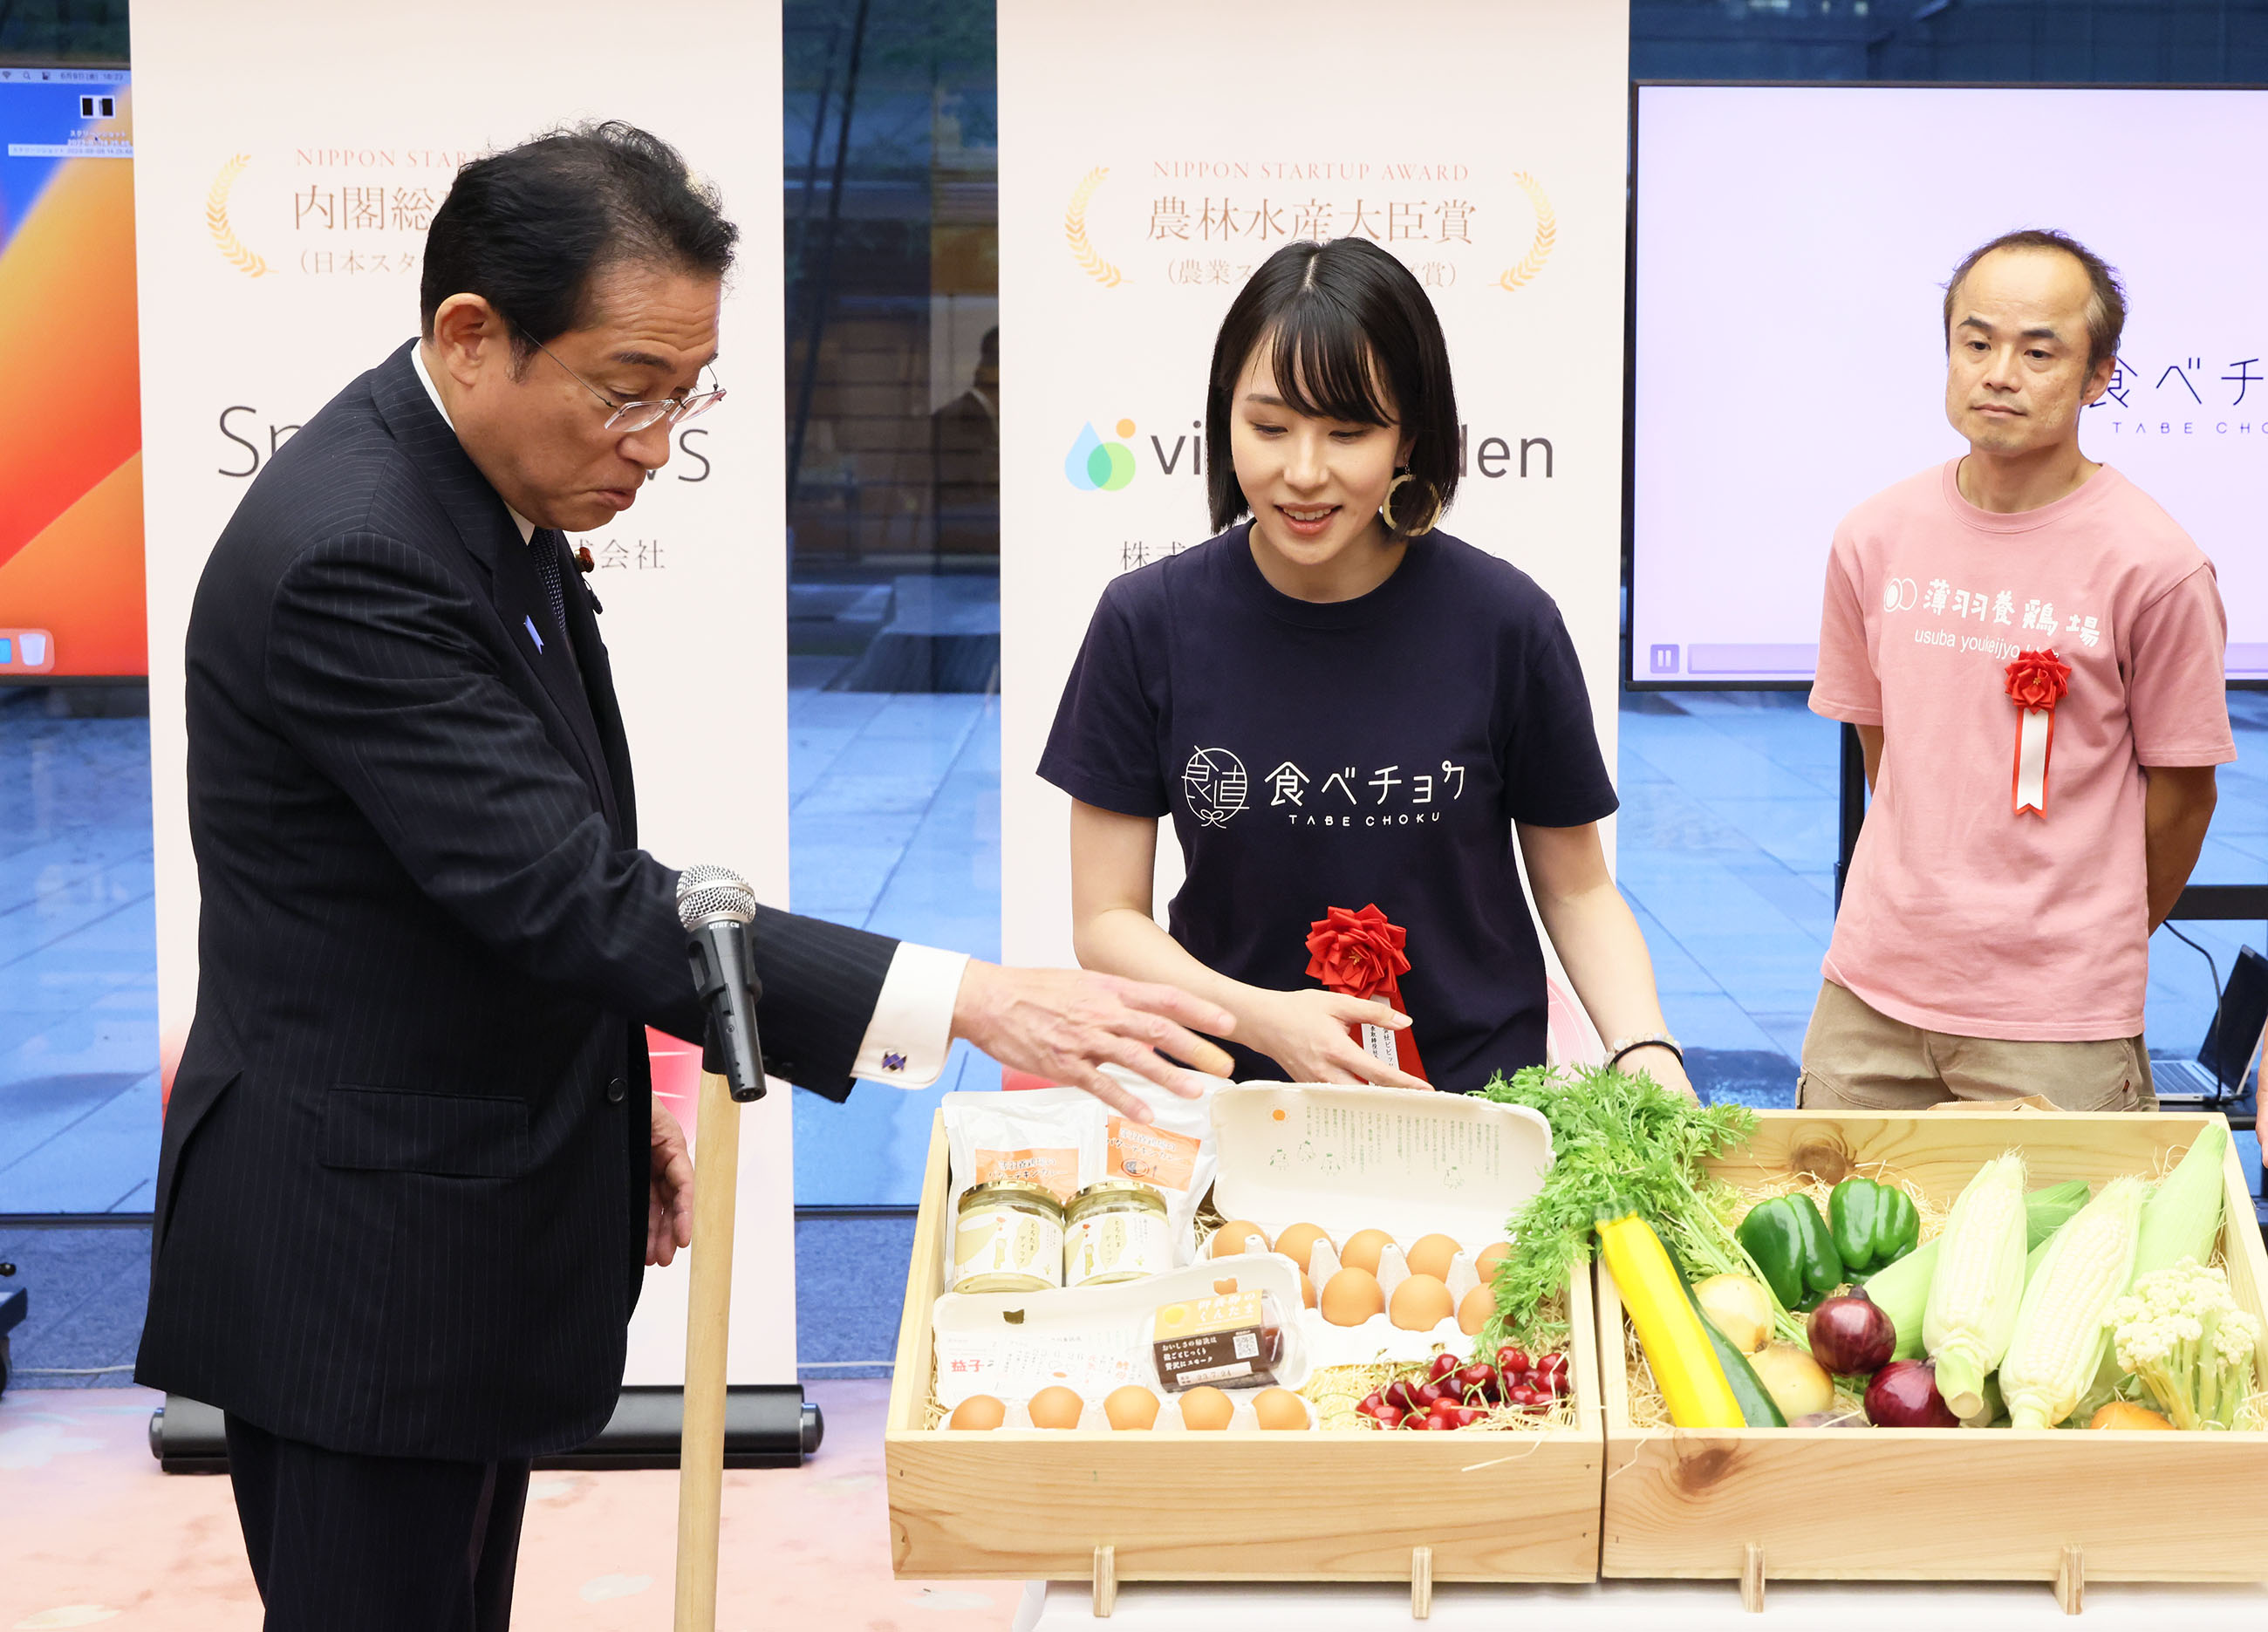 Prime Minister Kishida viewing the exhibition booth of award winners (4)